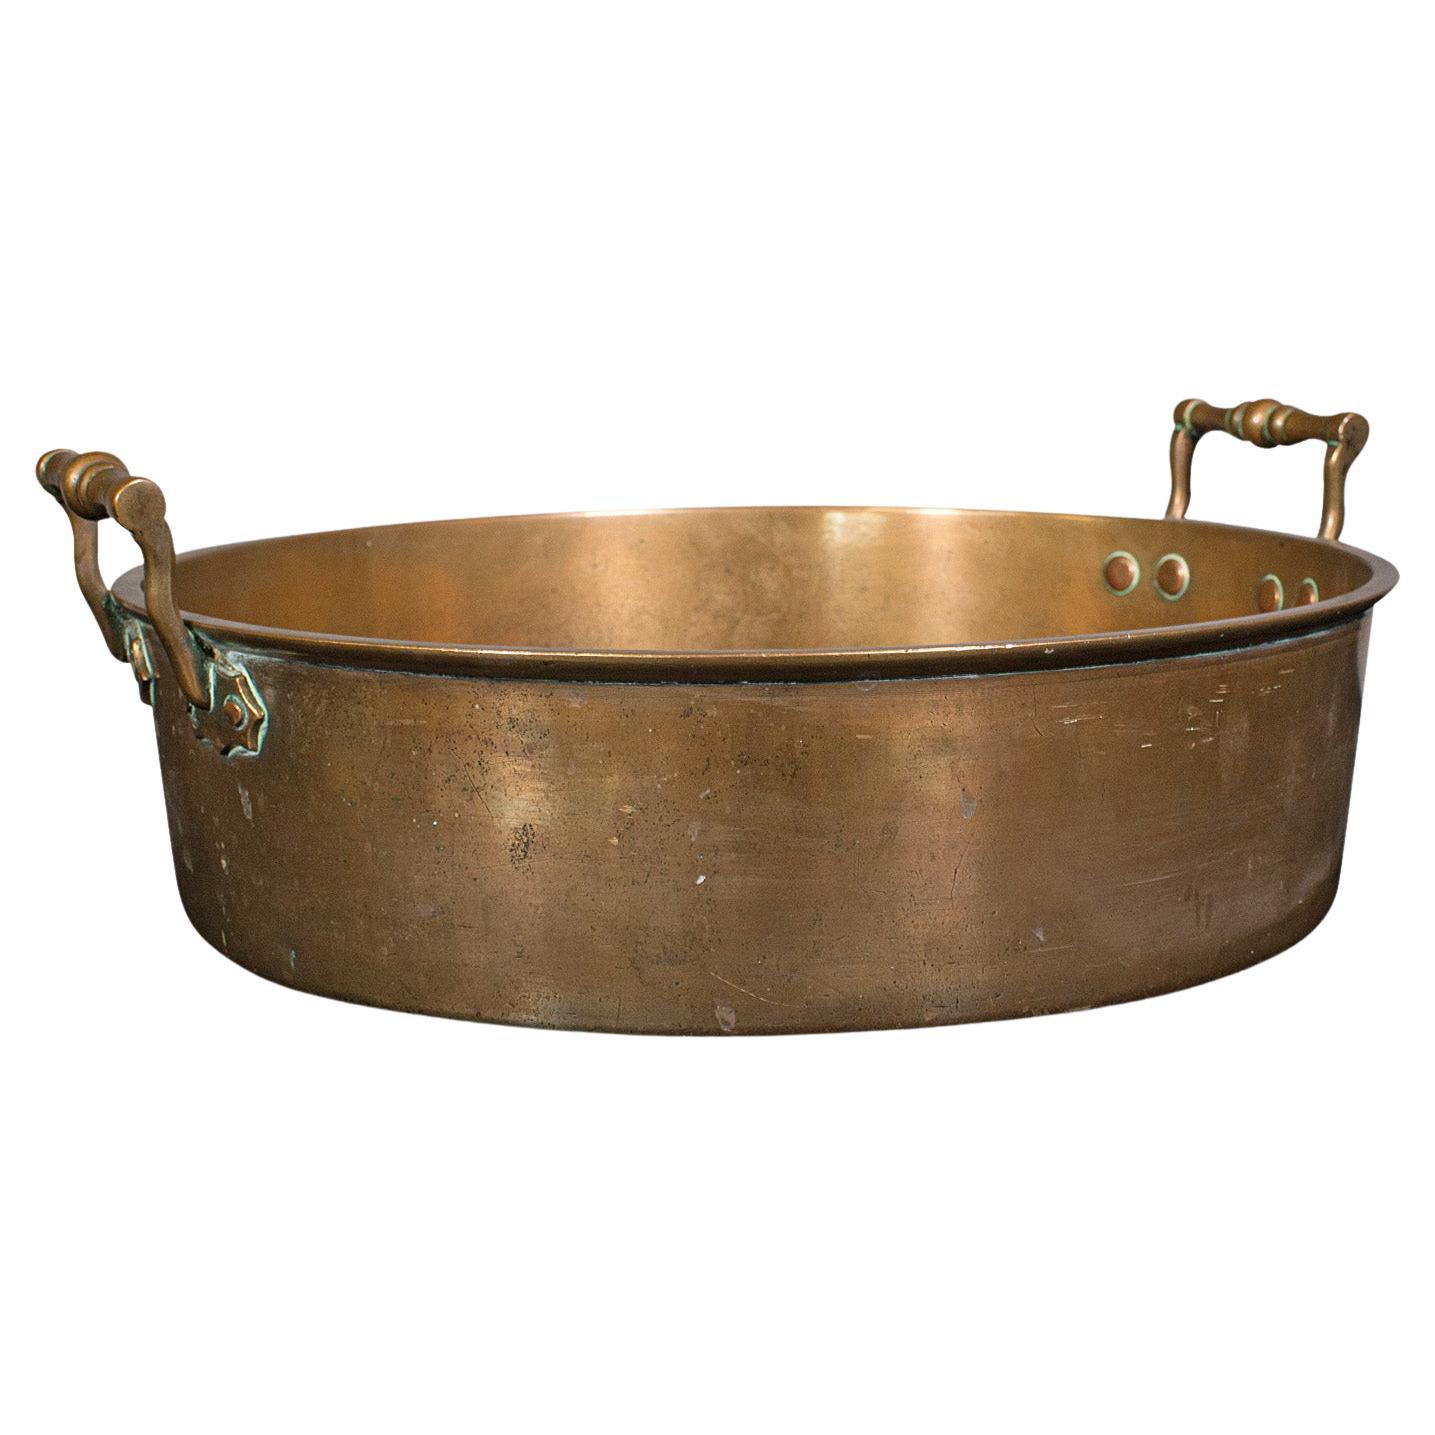 Antique Country House Braising Pan, English, Bronze, Cooking Pot, Victorian